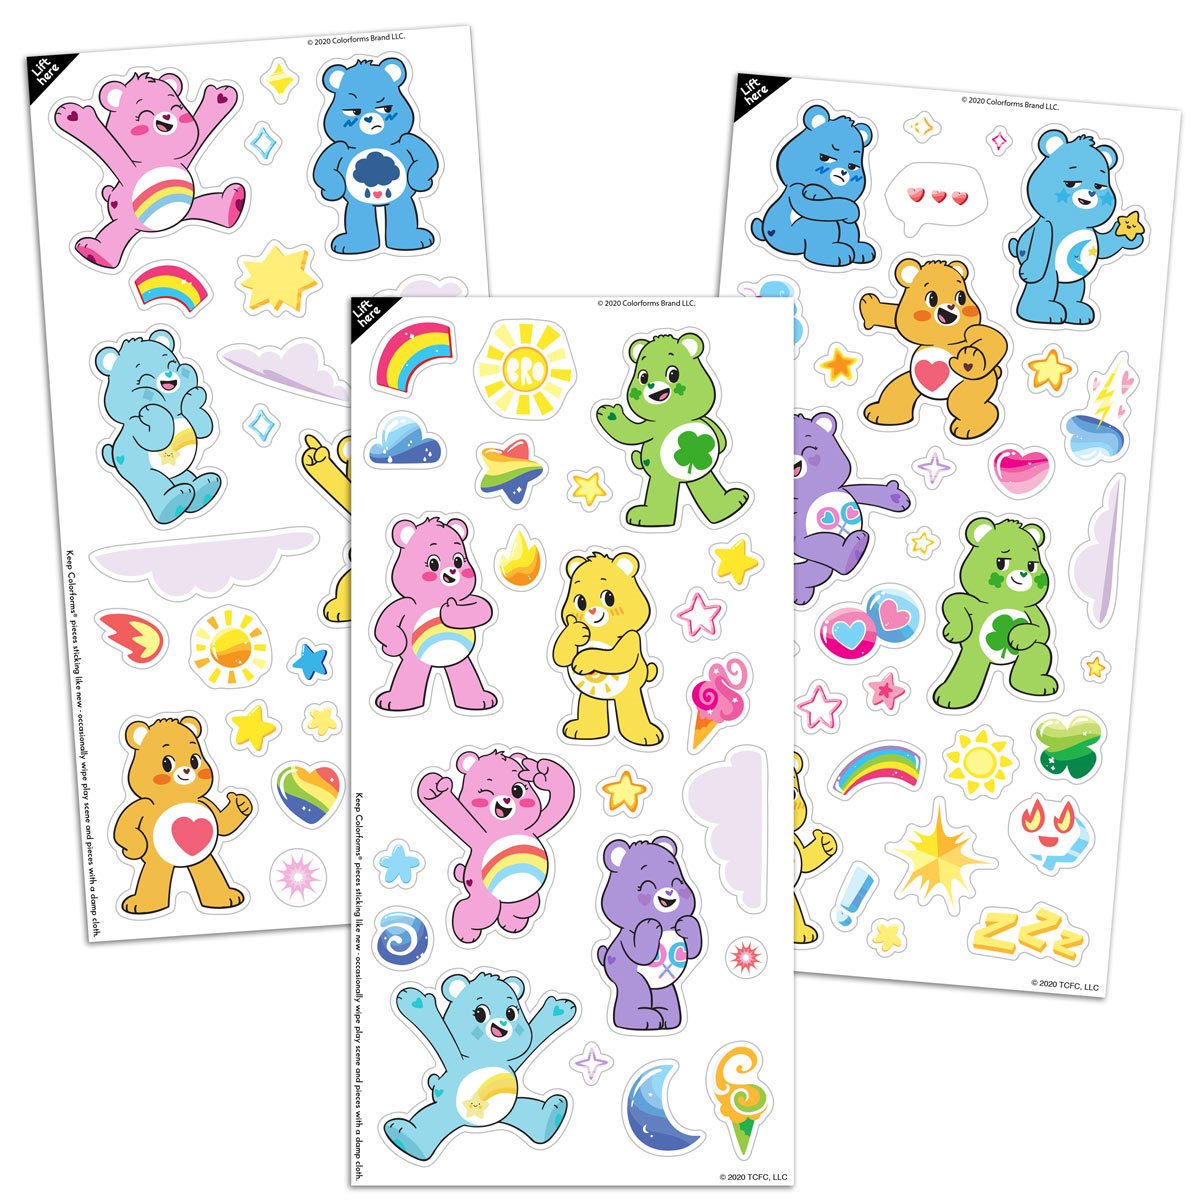 Colorforms Care Bears Travel Set - Wit & Whimsy Toys